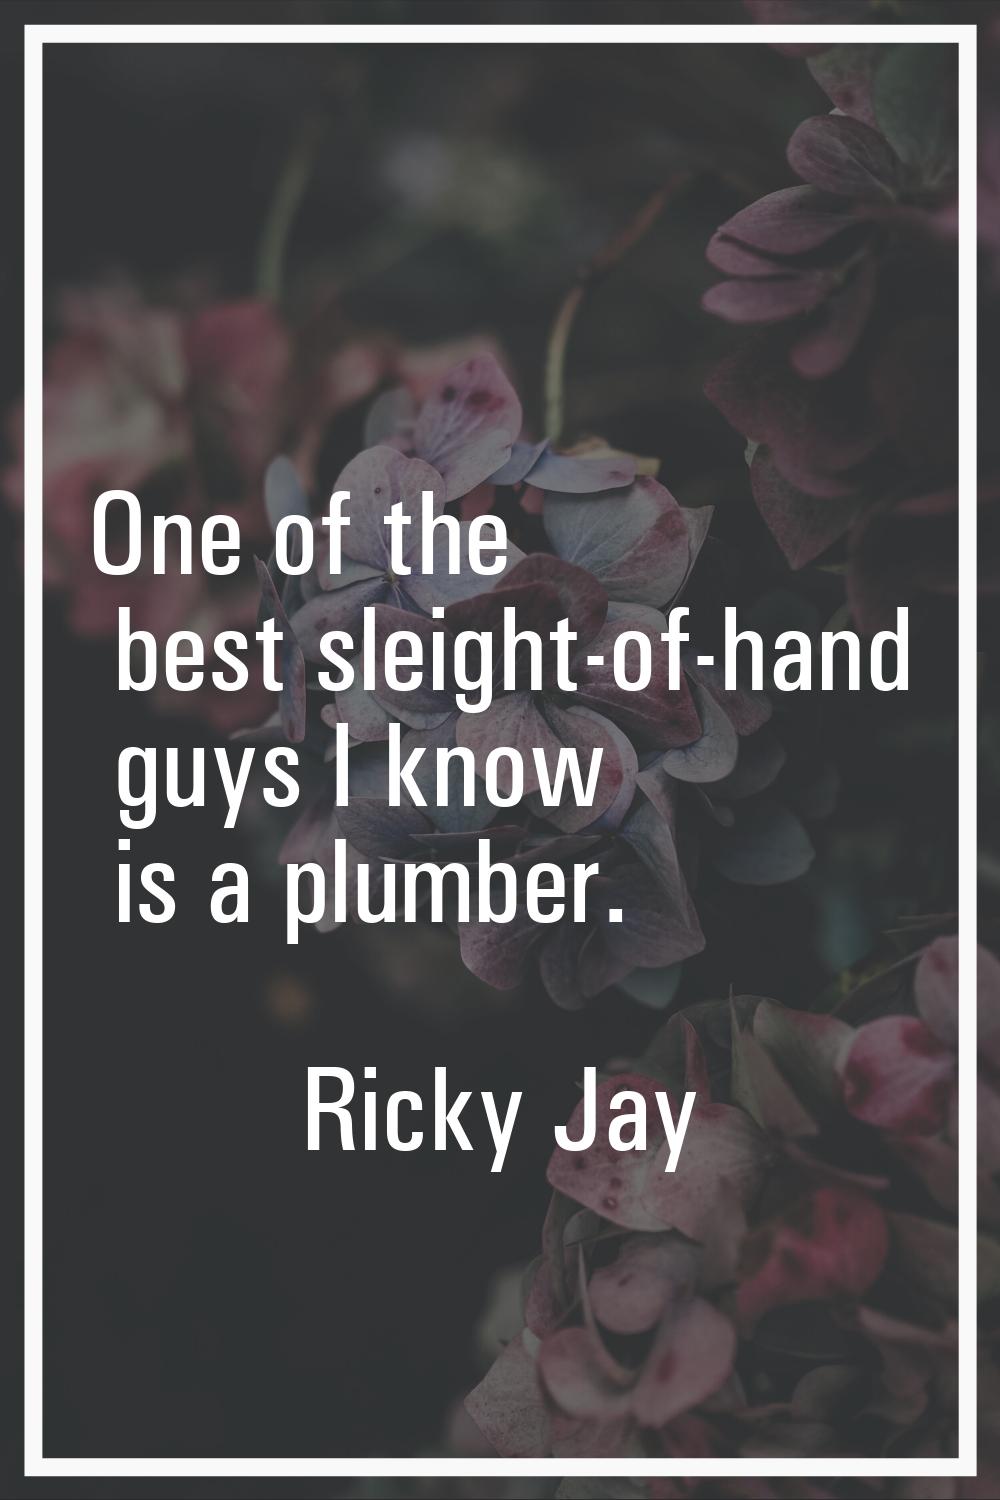 One of the best sleight-of-hand guys I know is a plumber.